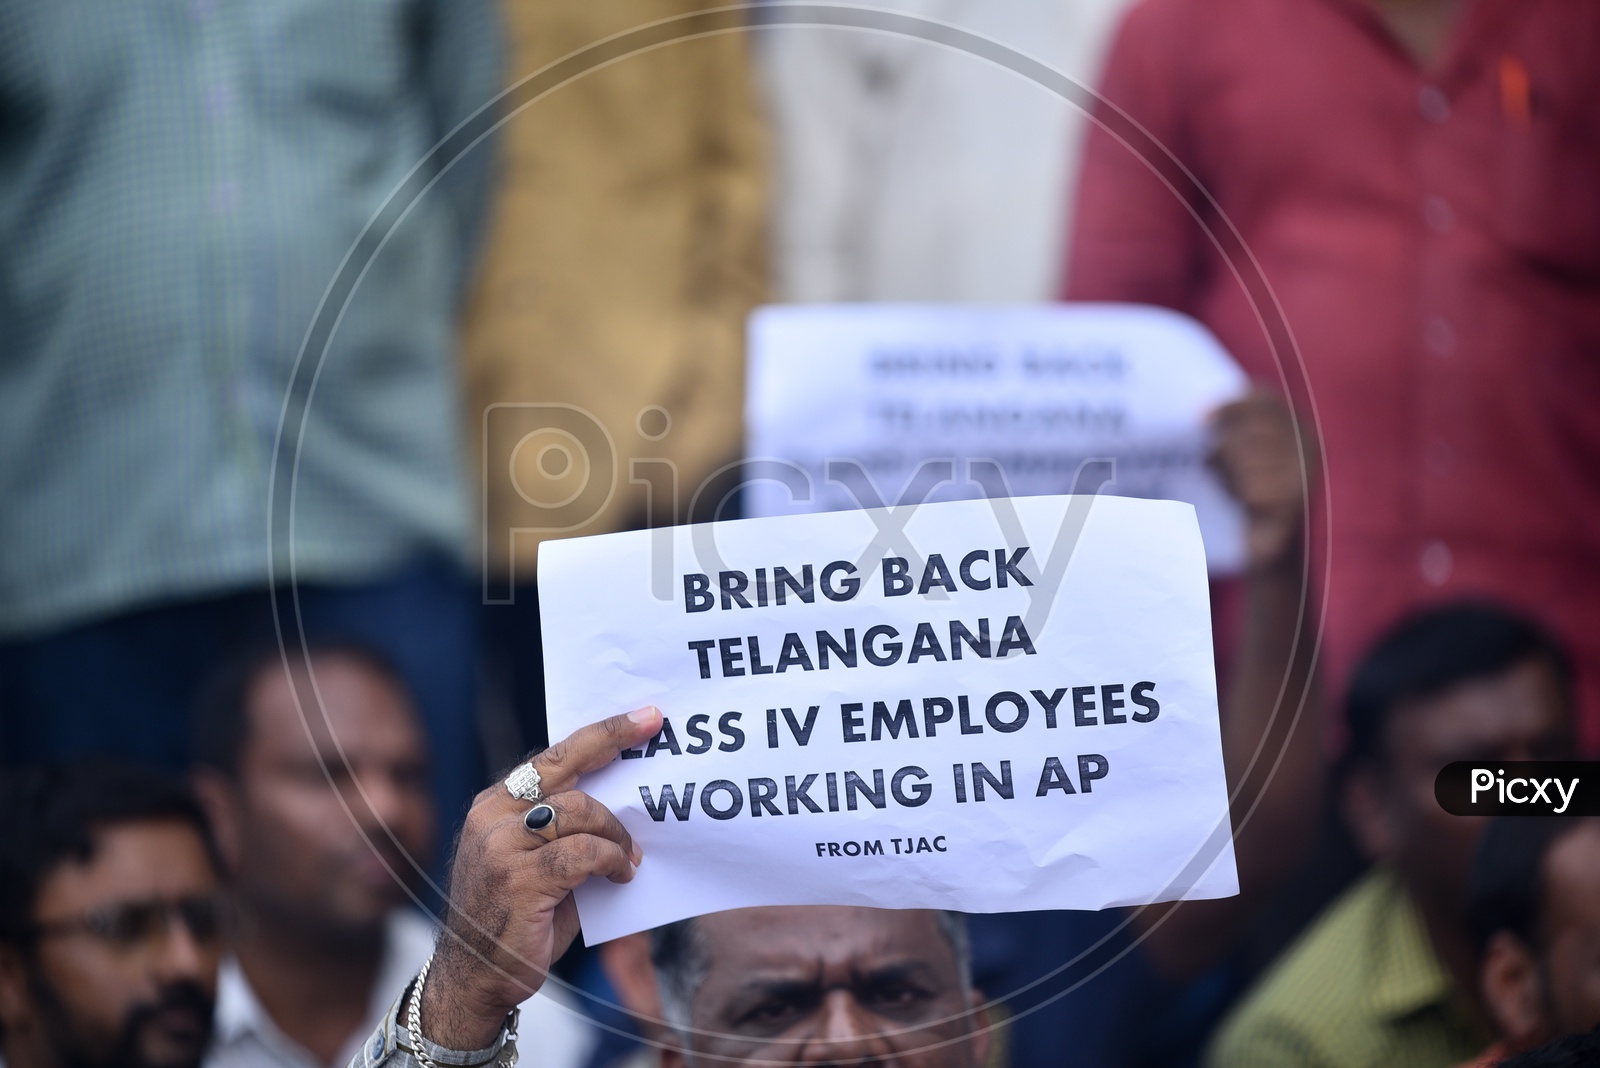 TNGO's and TJAC Unions Protesting for not bringing back Telangana Employees who are still working in Andhra Pradesh after Bifurcation